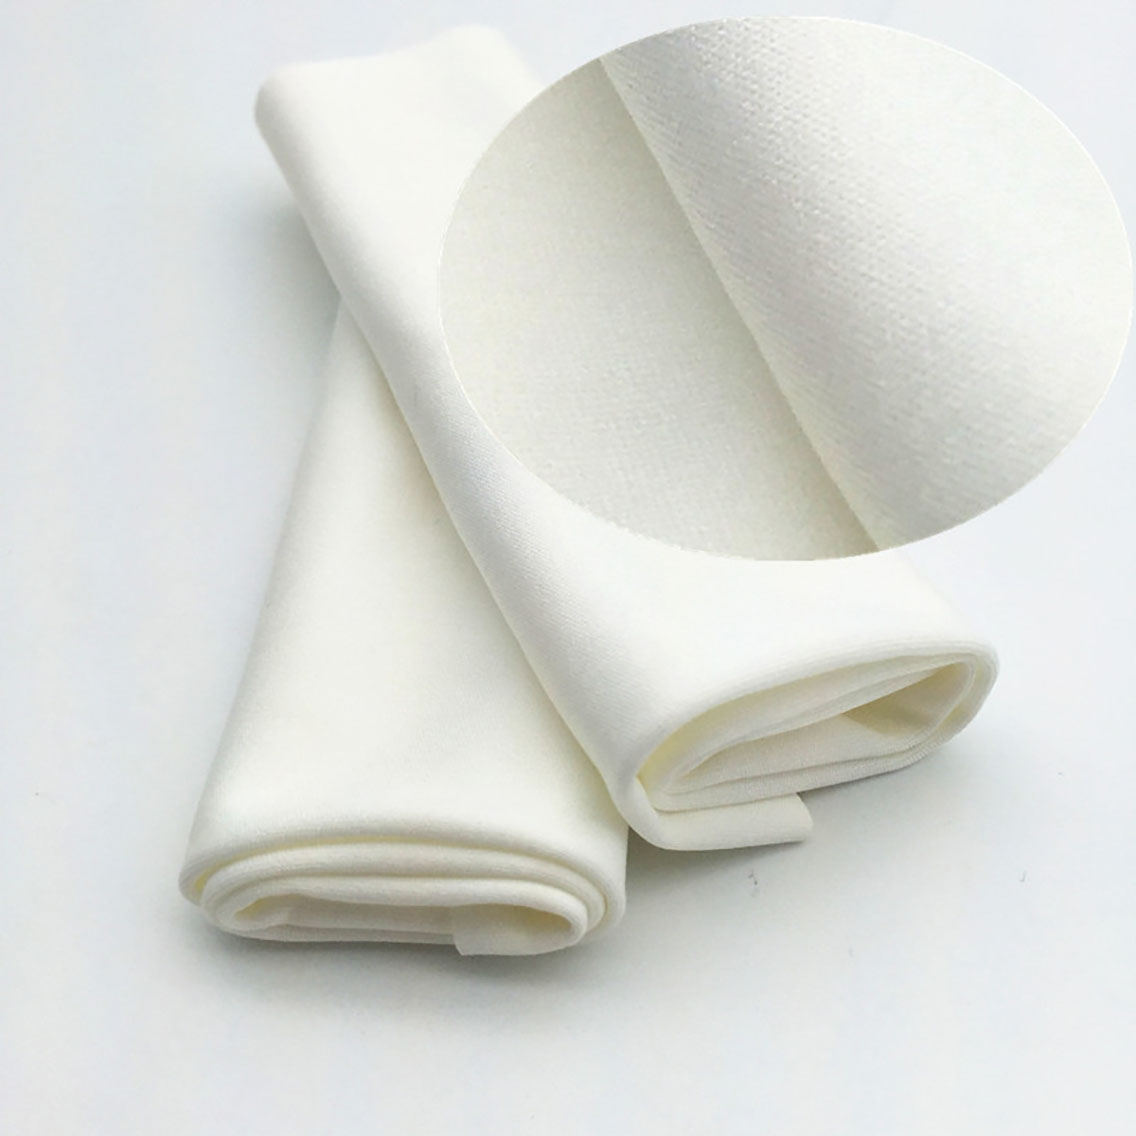 Cleanmo 70% Polyester microfiber wipe factory for medical device products-2